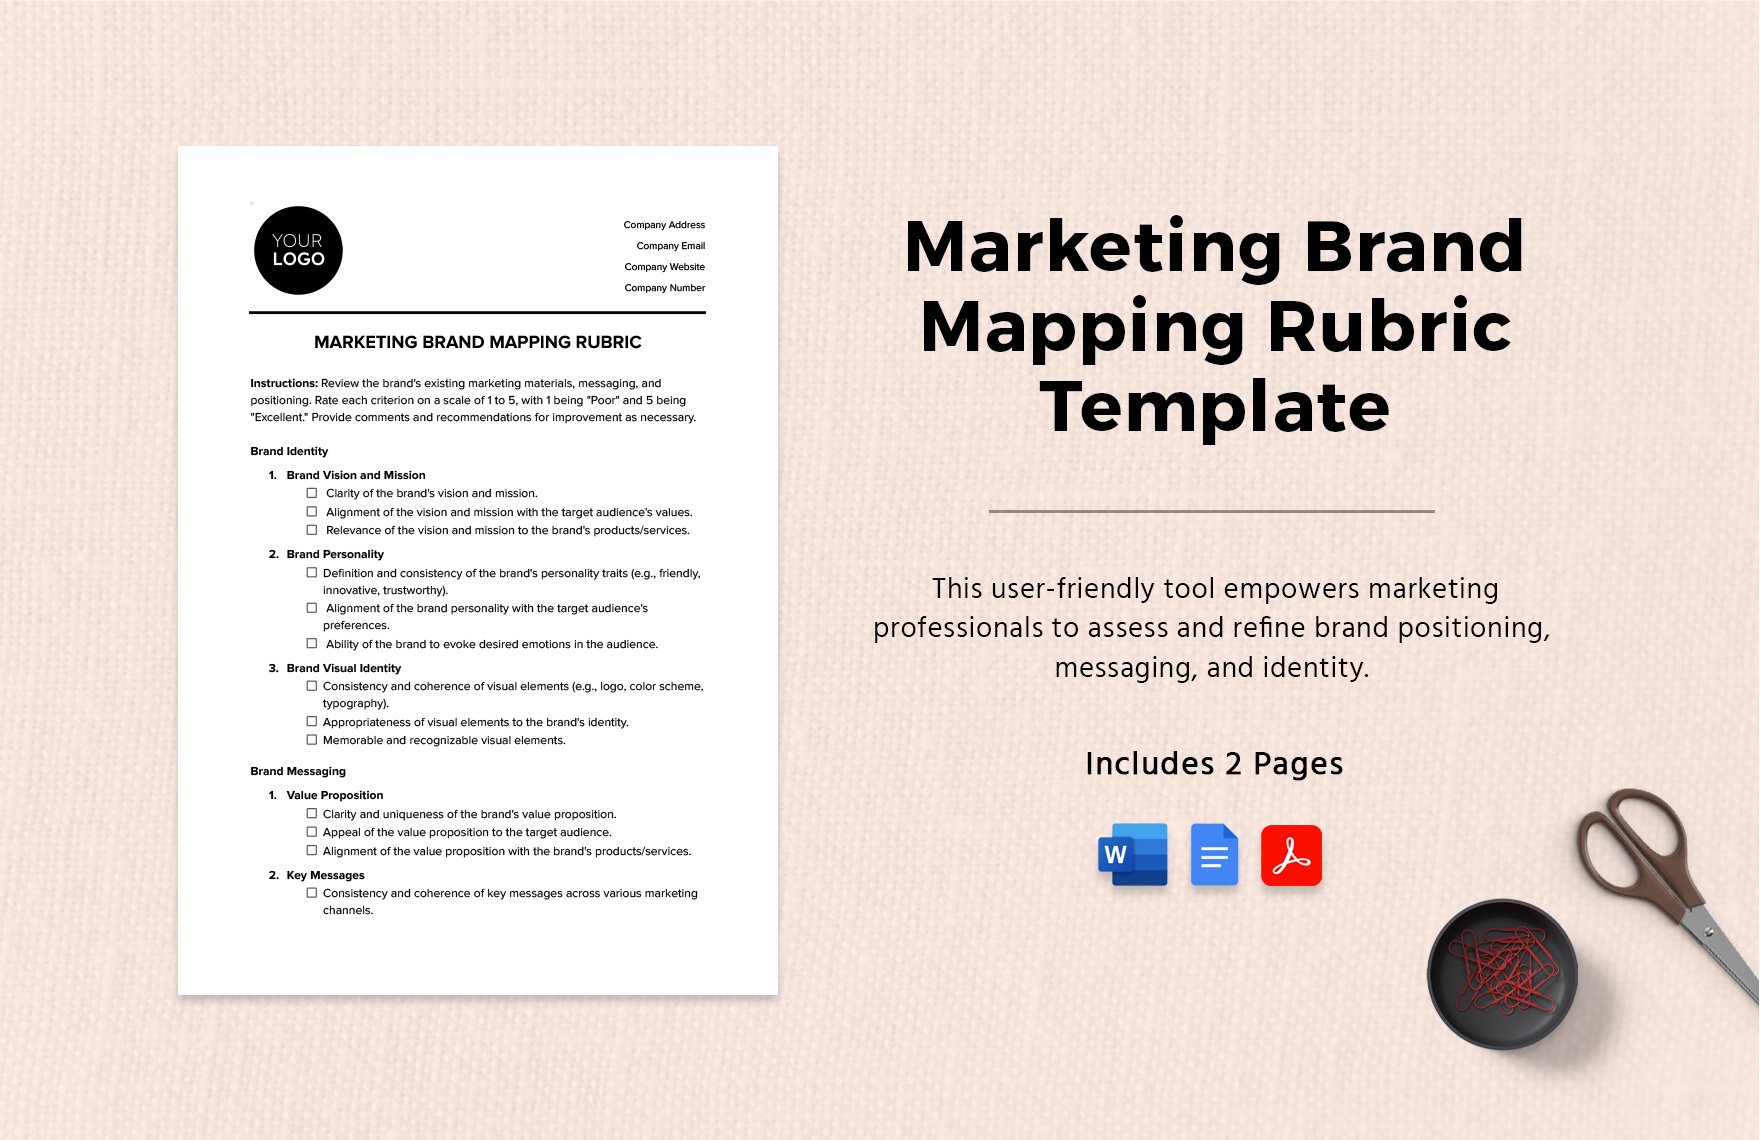 Marketing Brand Mapping Rubric Template in Word, Google Docs, PDF